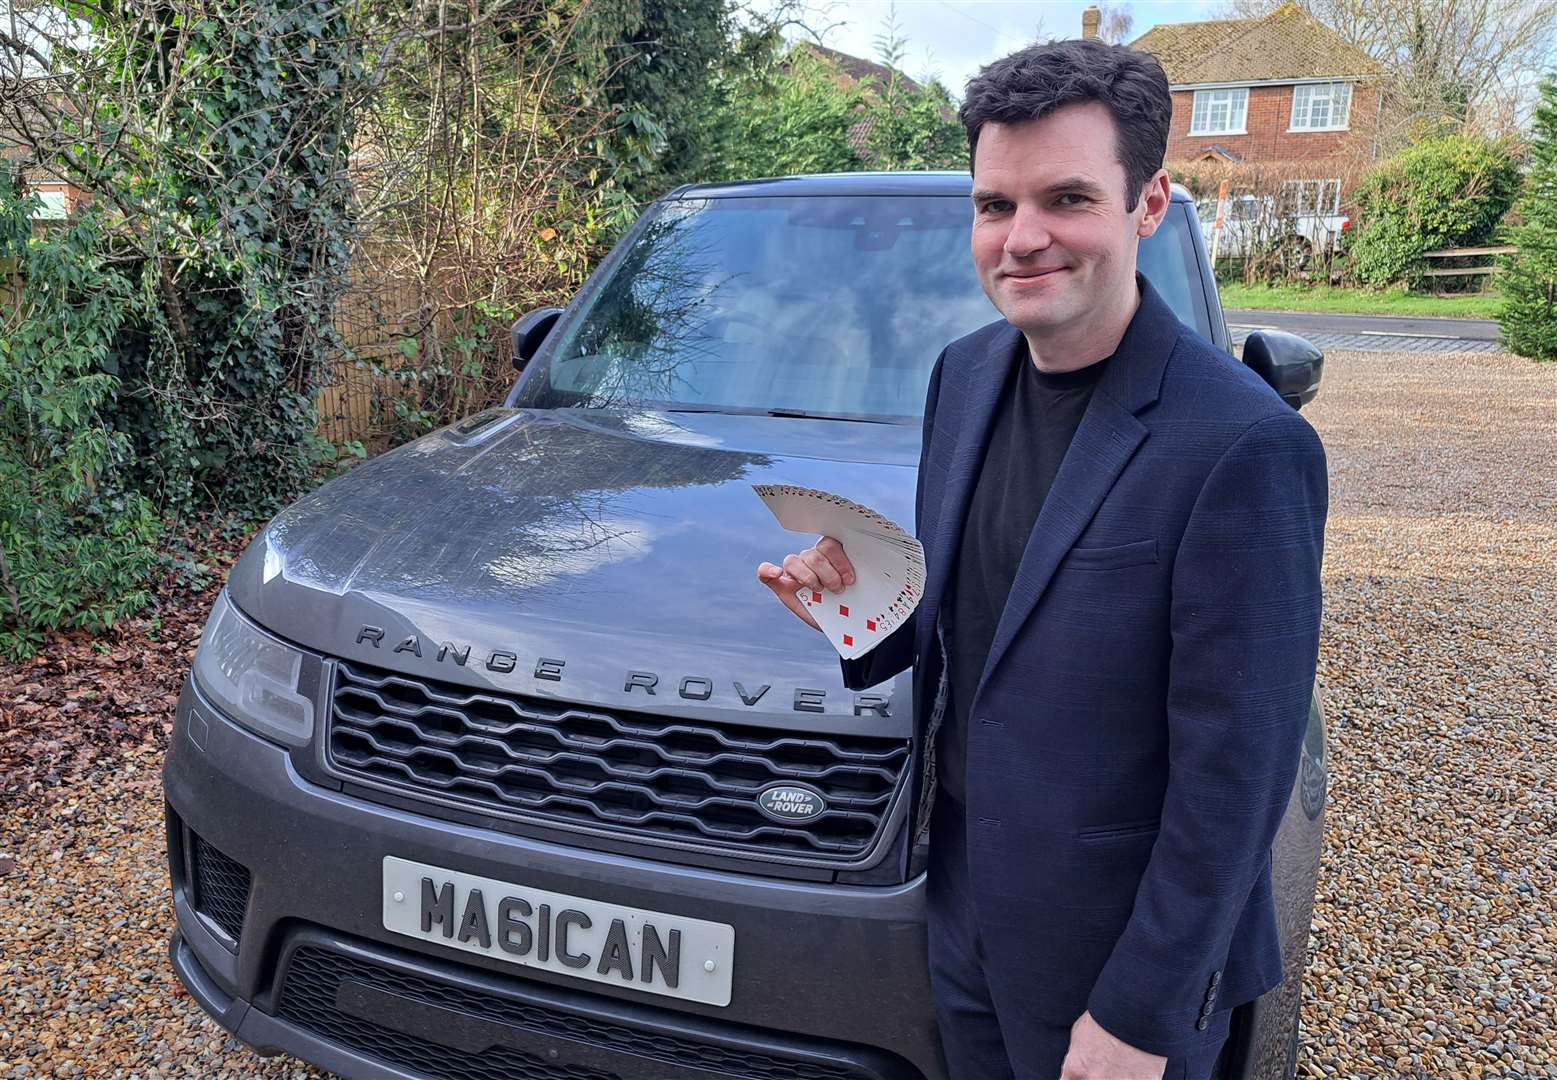 Ashford magician Chris Harding with his playing cards used for tricks and his car with a personalised number plate